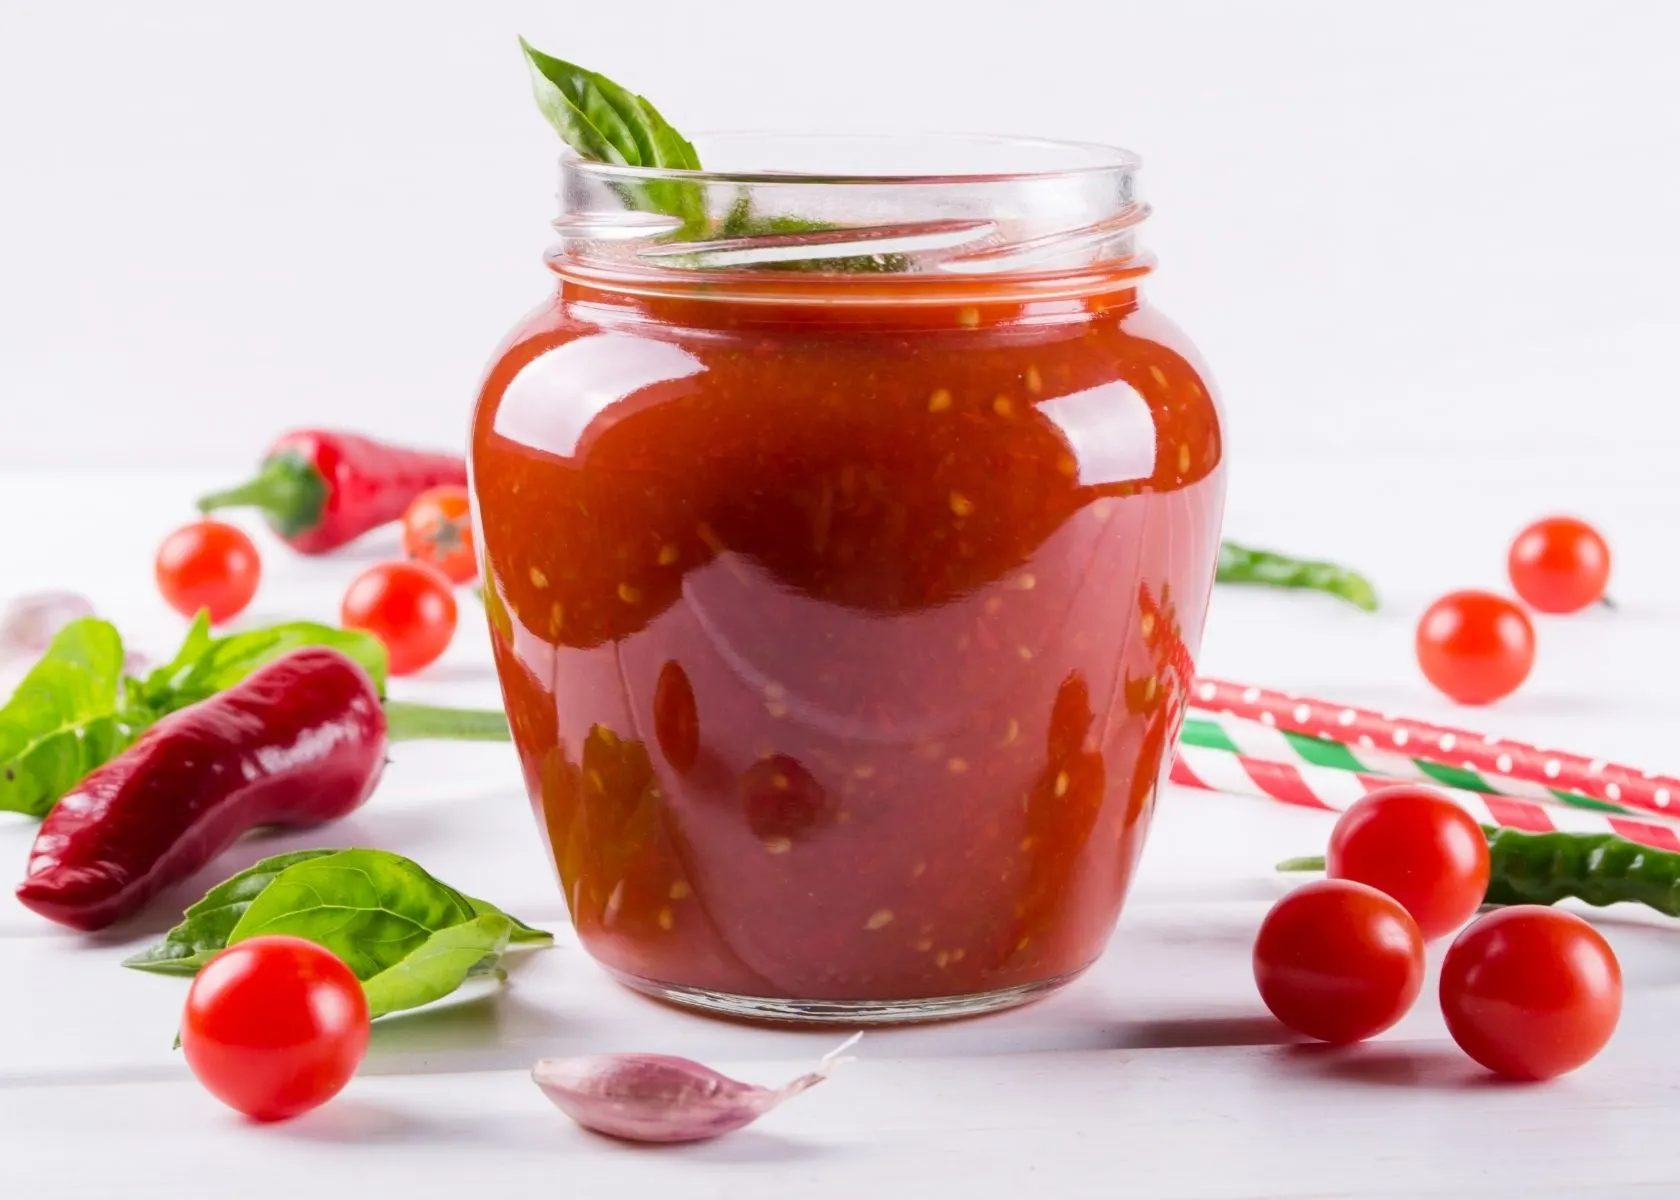 Salsa roja in large clear glass jar with green garnish on top.